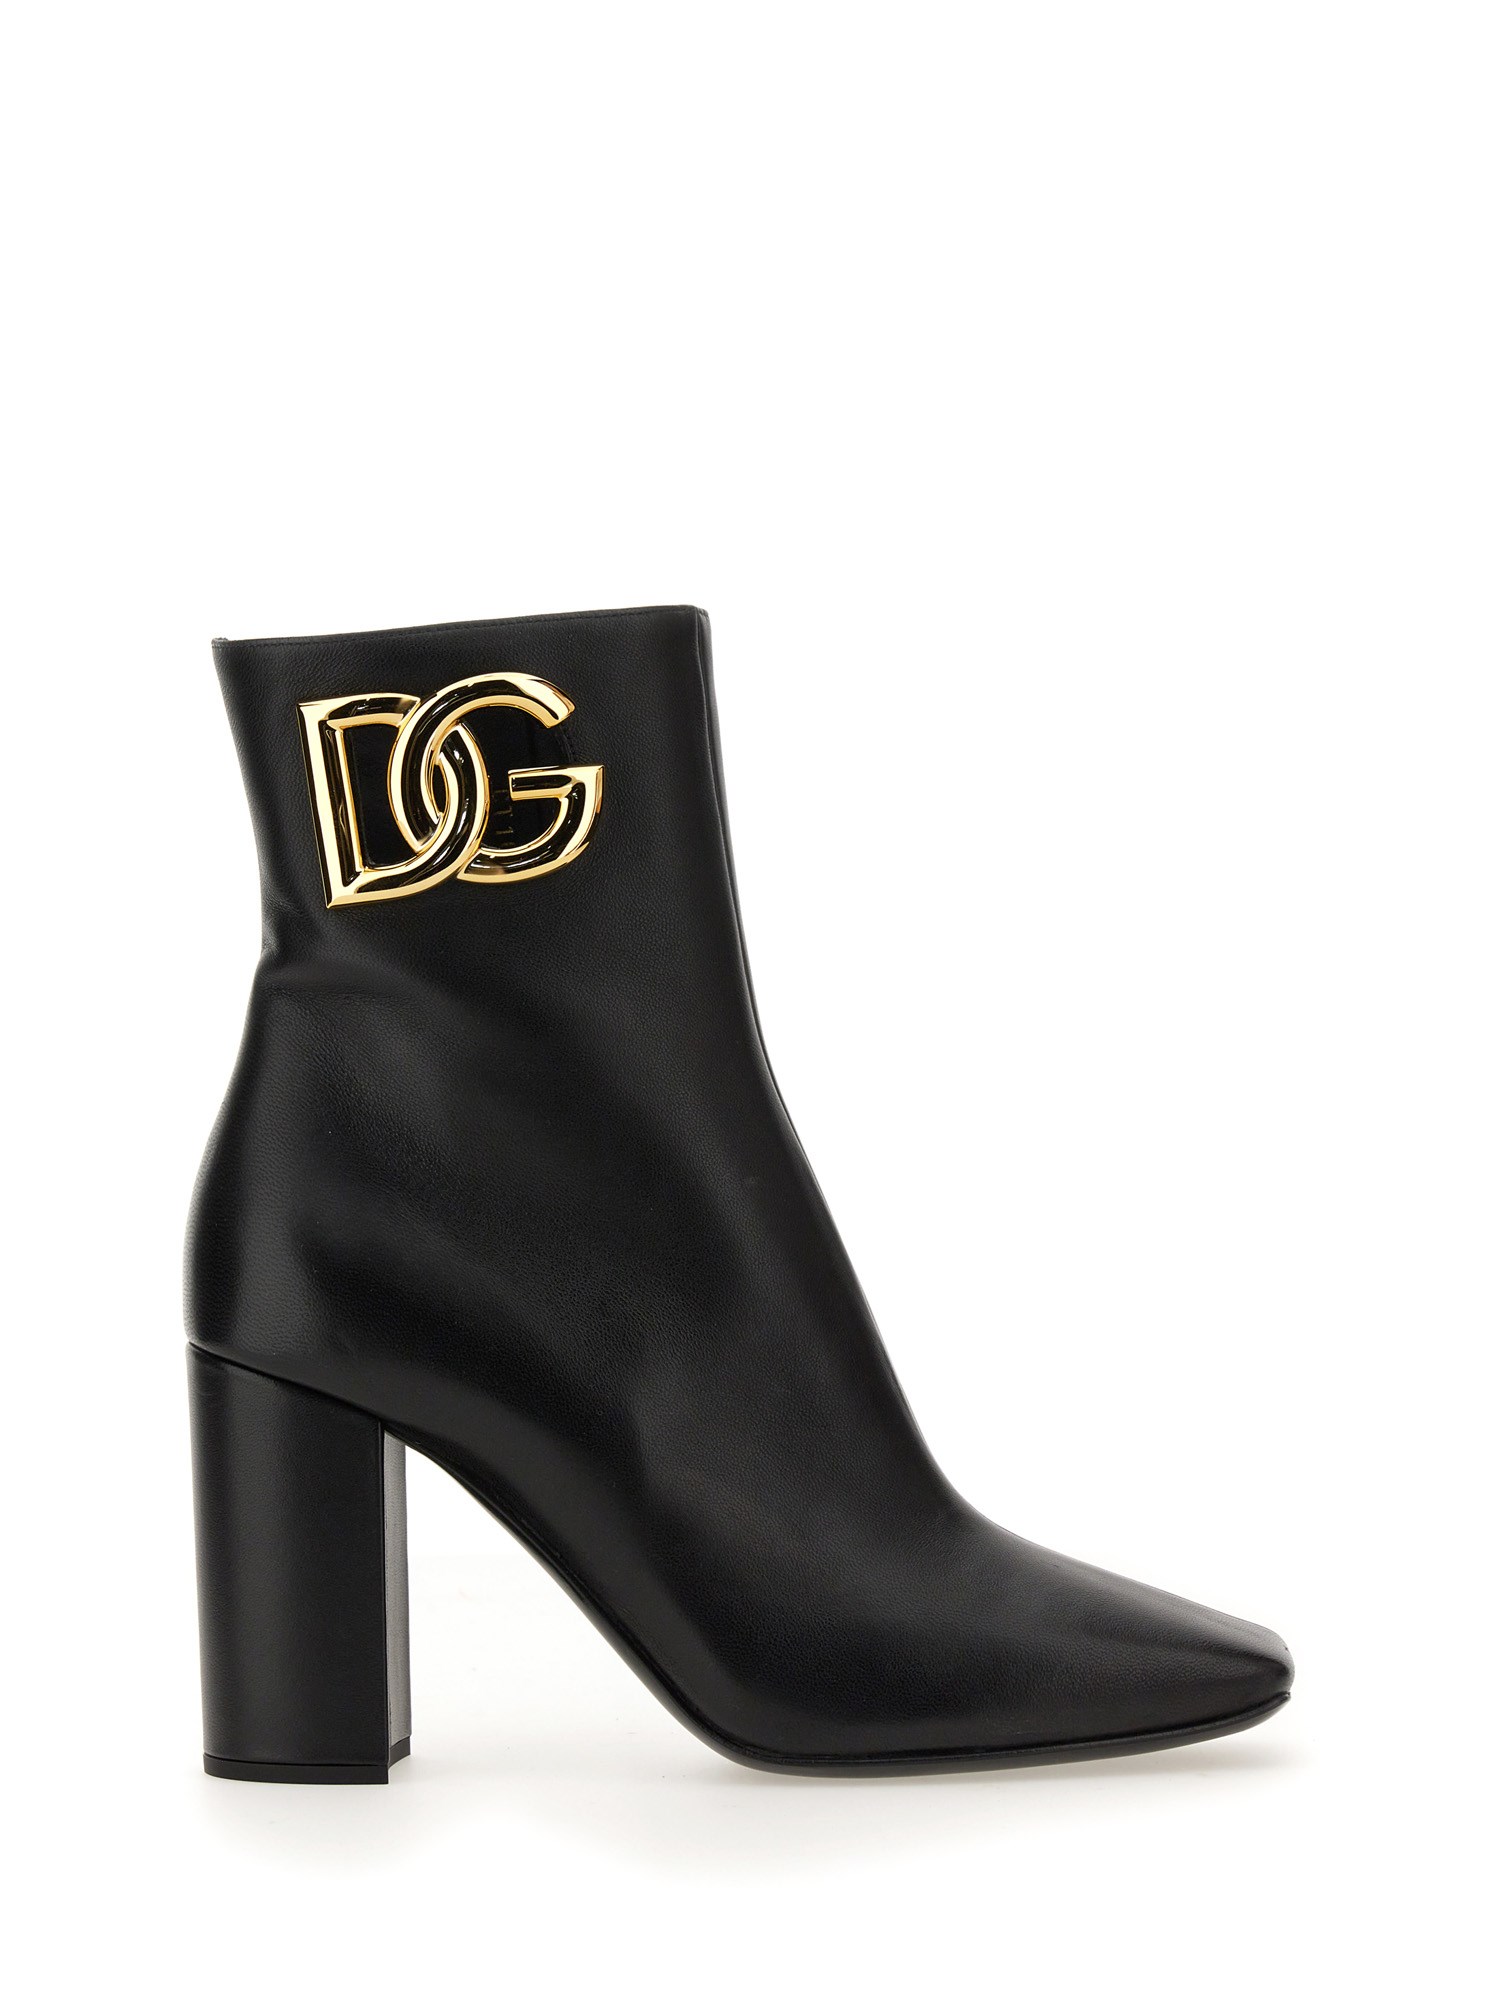 dolce & gabbana ankle boot with logo